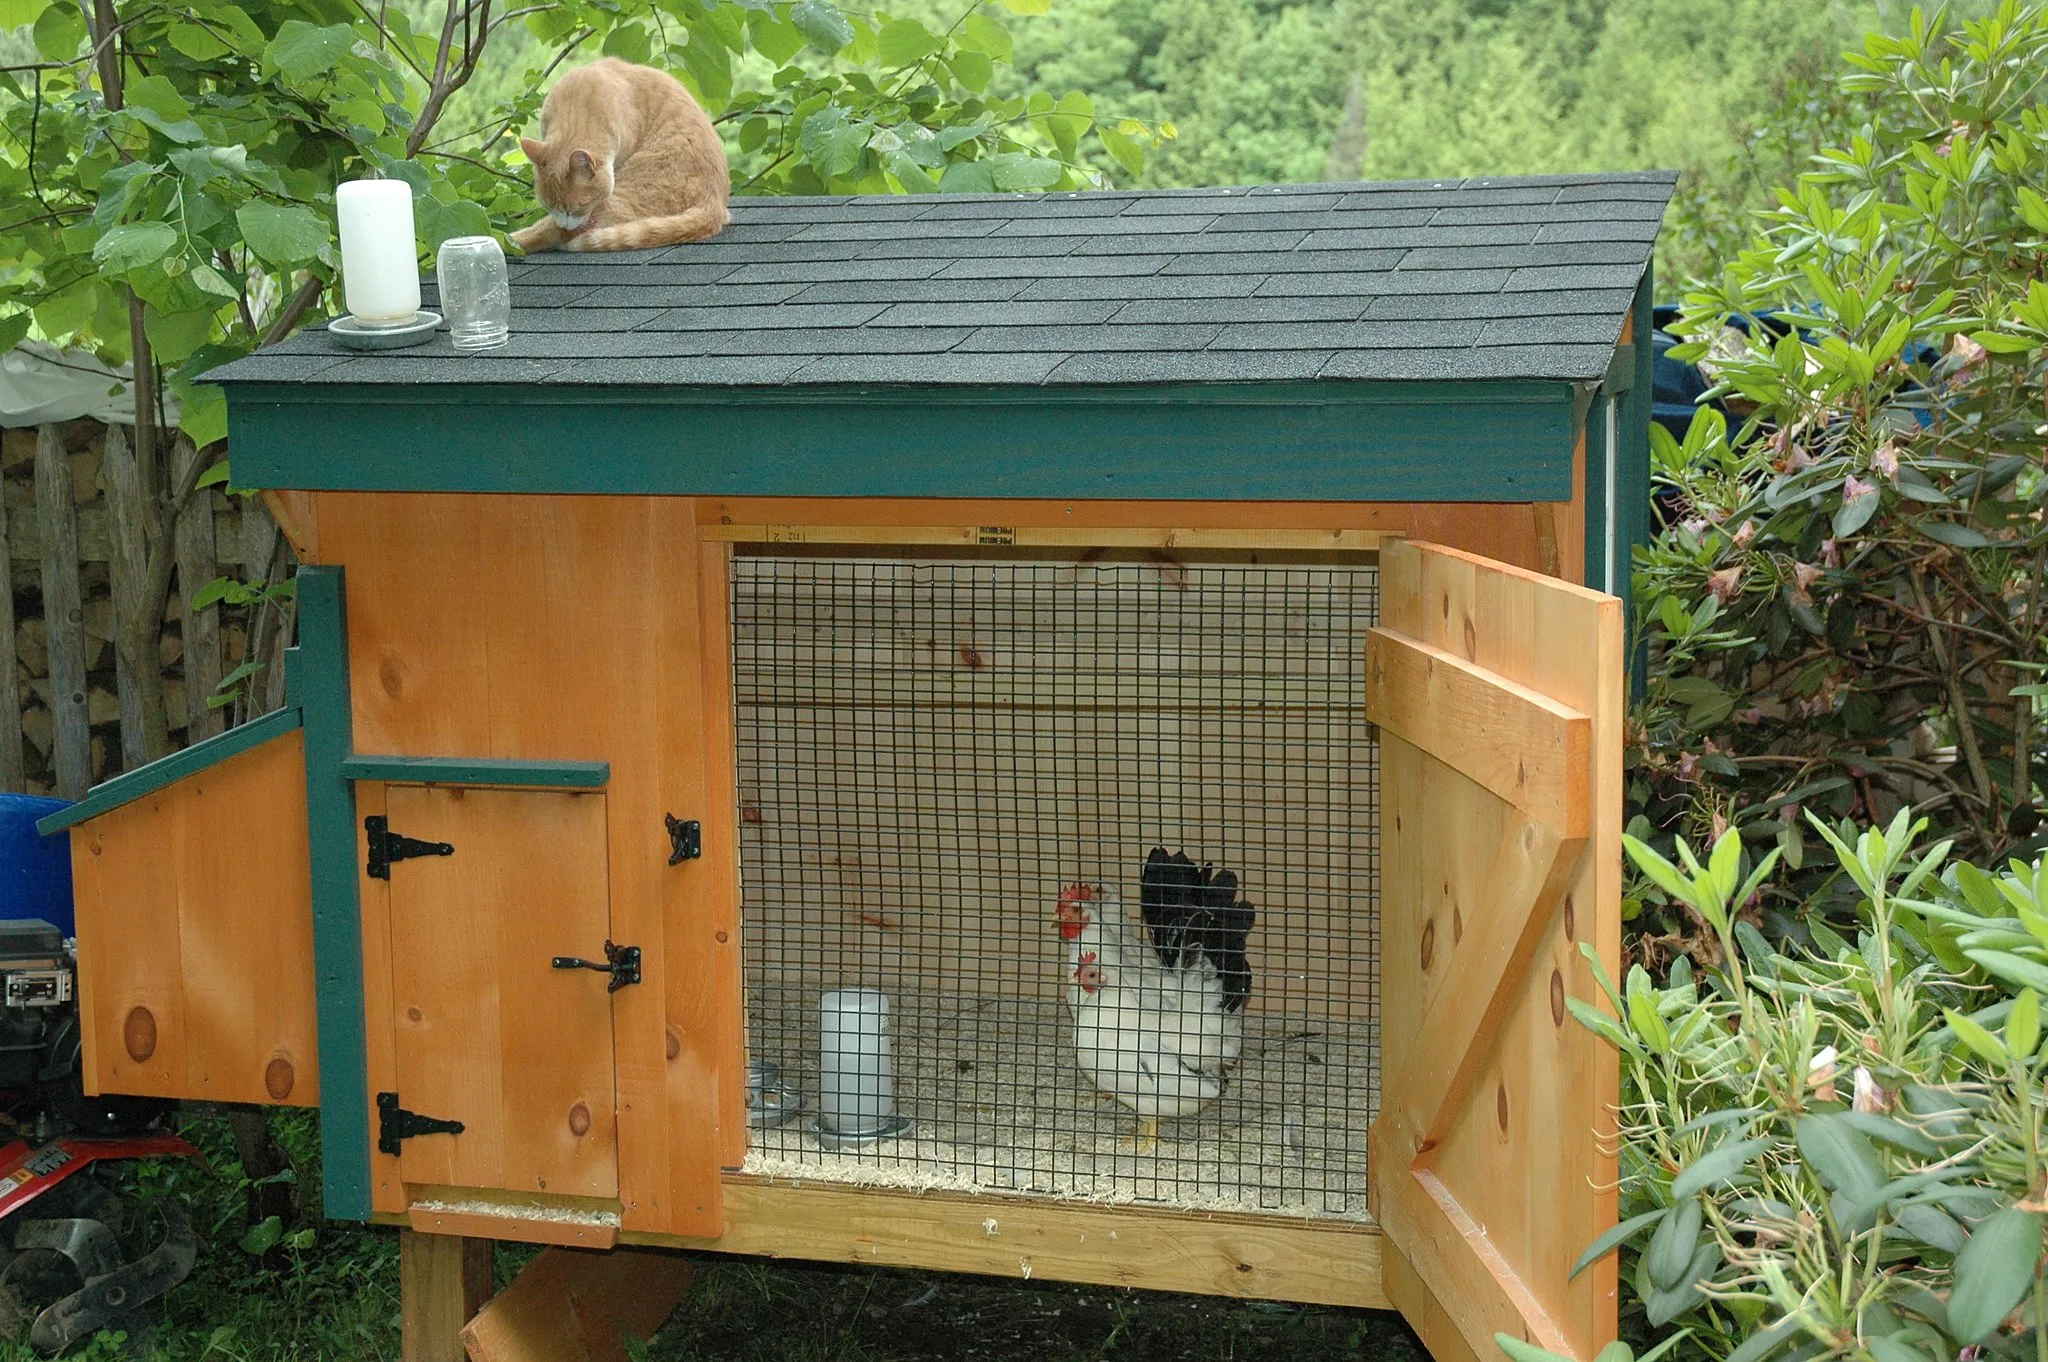 Photo showing: A pair of Black-tailed White Japanese bantams in a chicken coop.